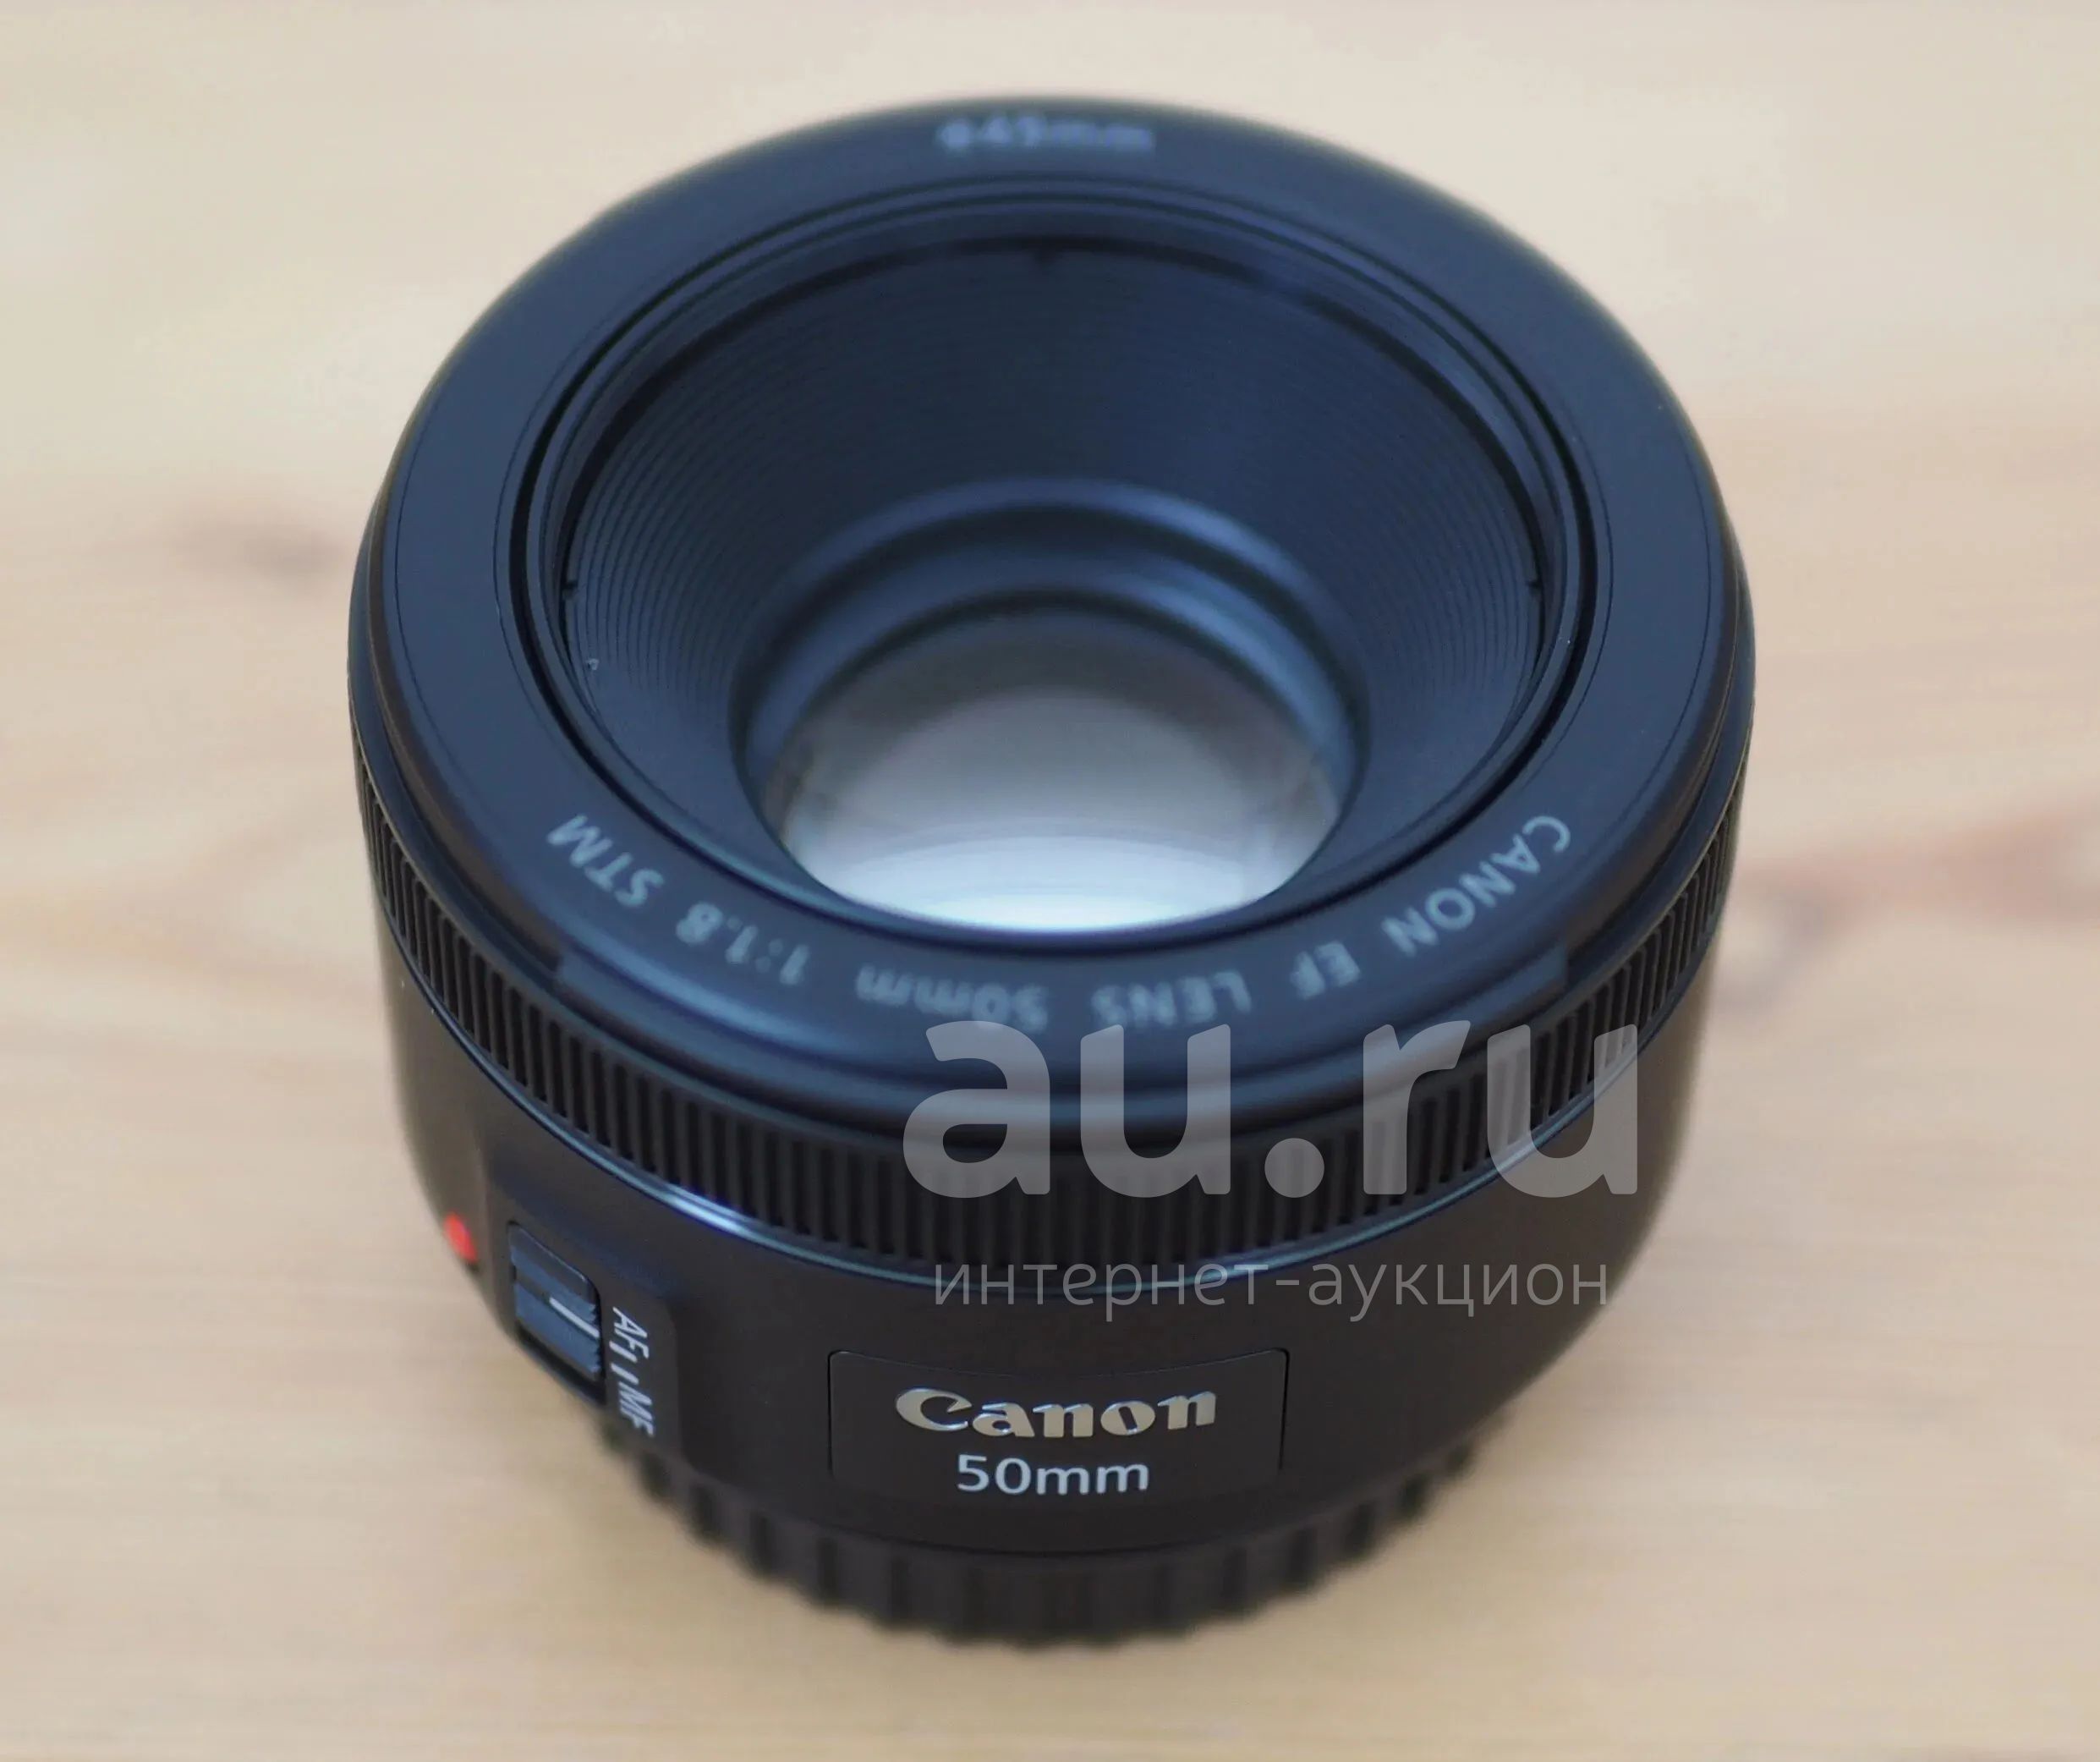 Canon m50 объективы. Canon EF 50mm f/1.8 STM. Canon 50 STM. Canon 50mm f/1.8 STM. Объектив Canon 50mm f/1.8.